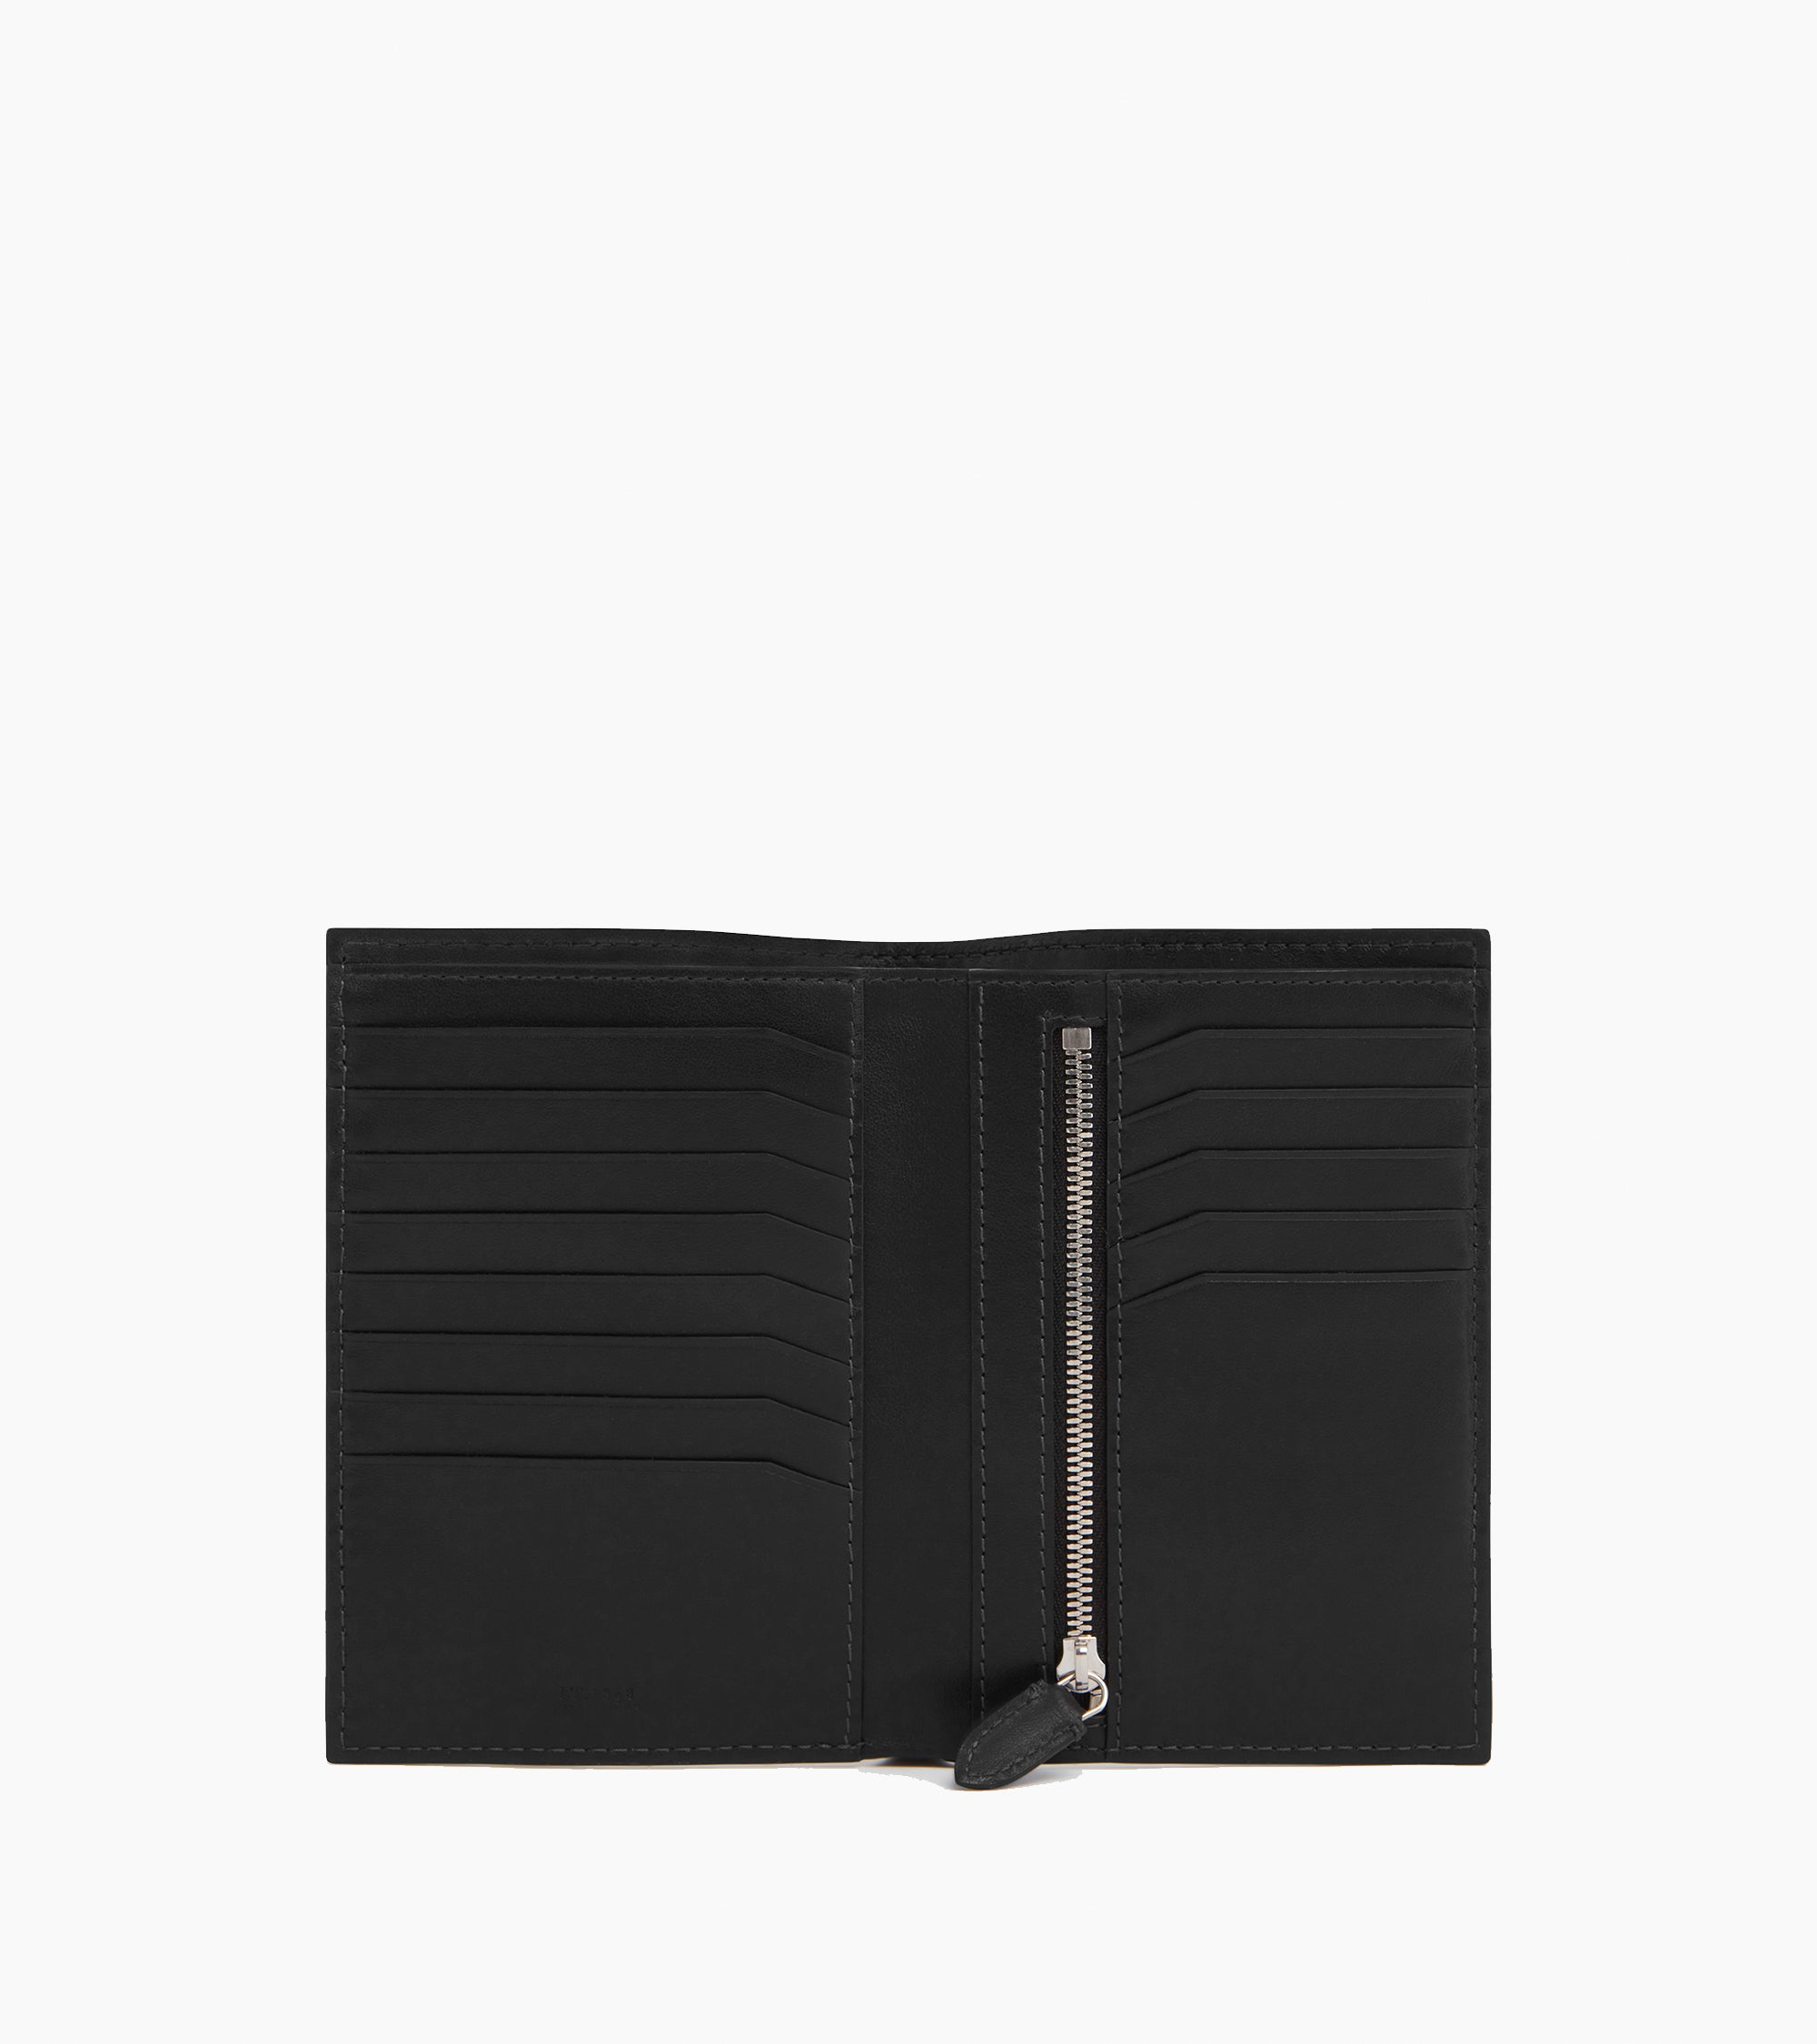 Léon large, zipped, vertical wallet in pebbled leather